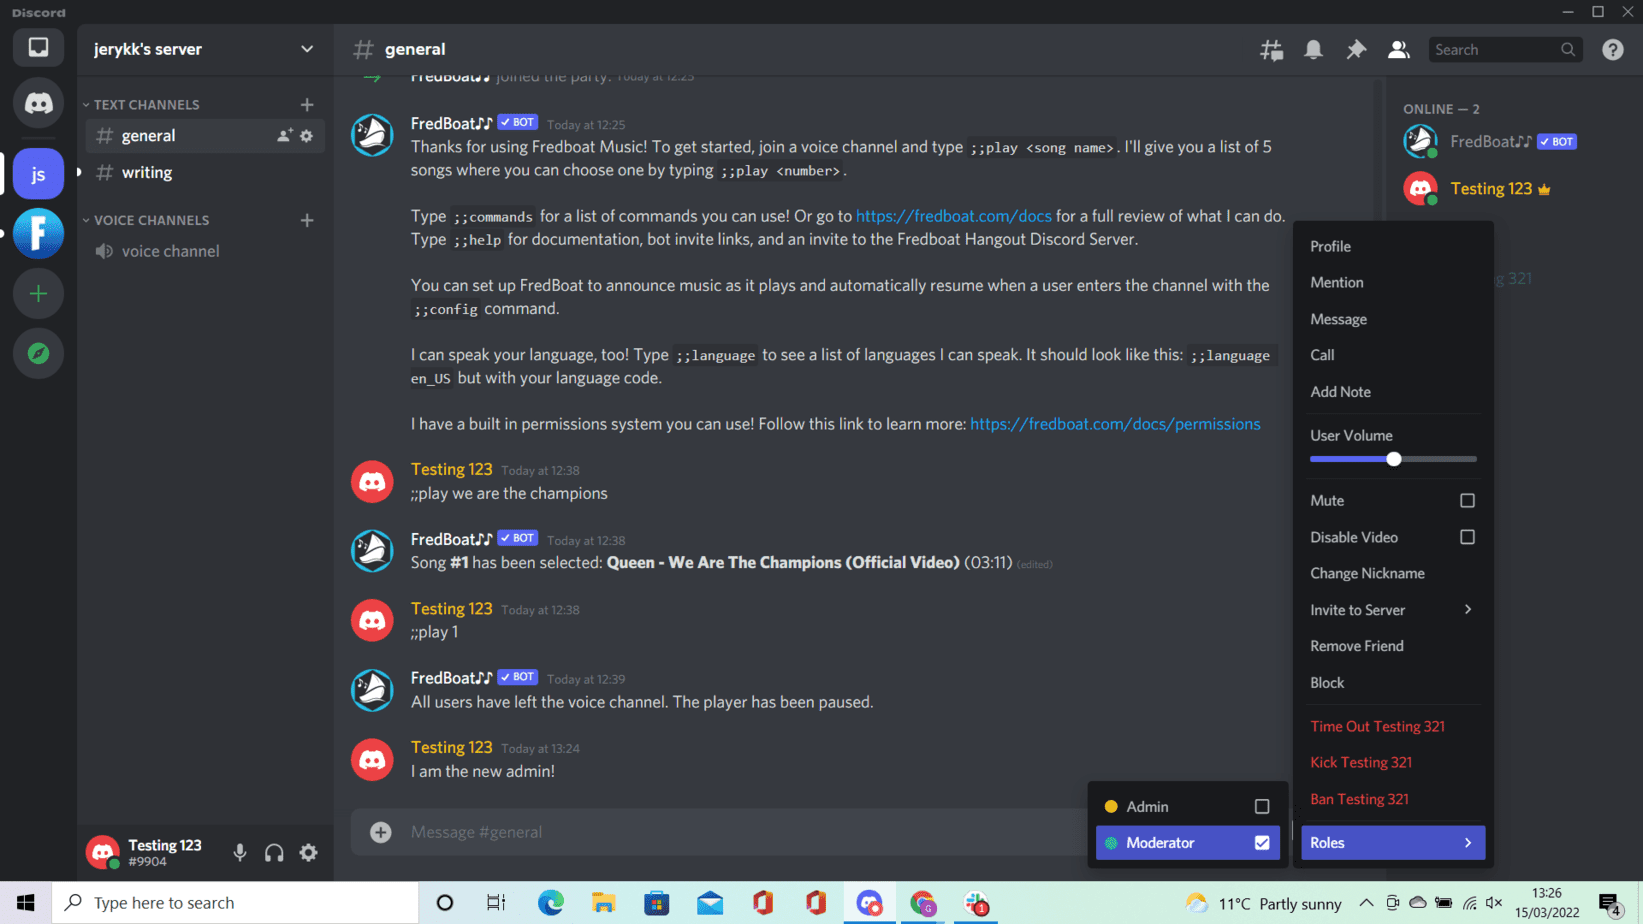 Making Other Roles In Discord